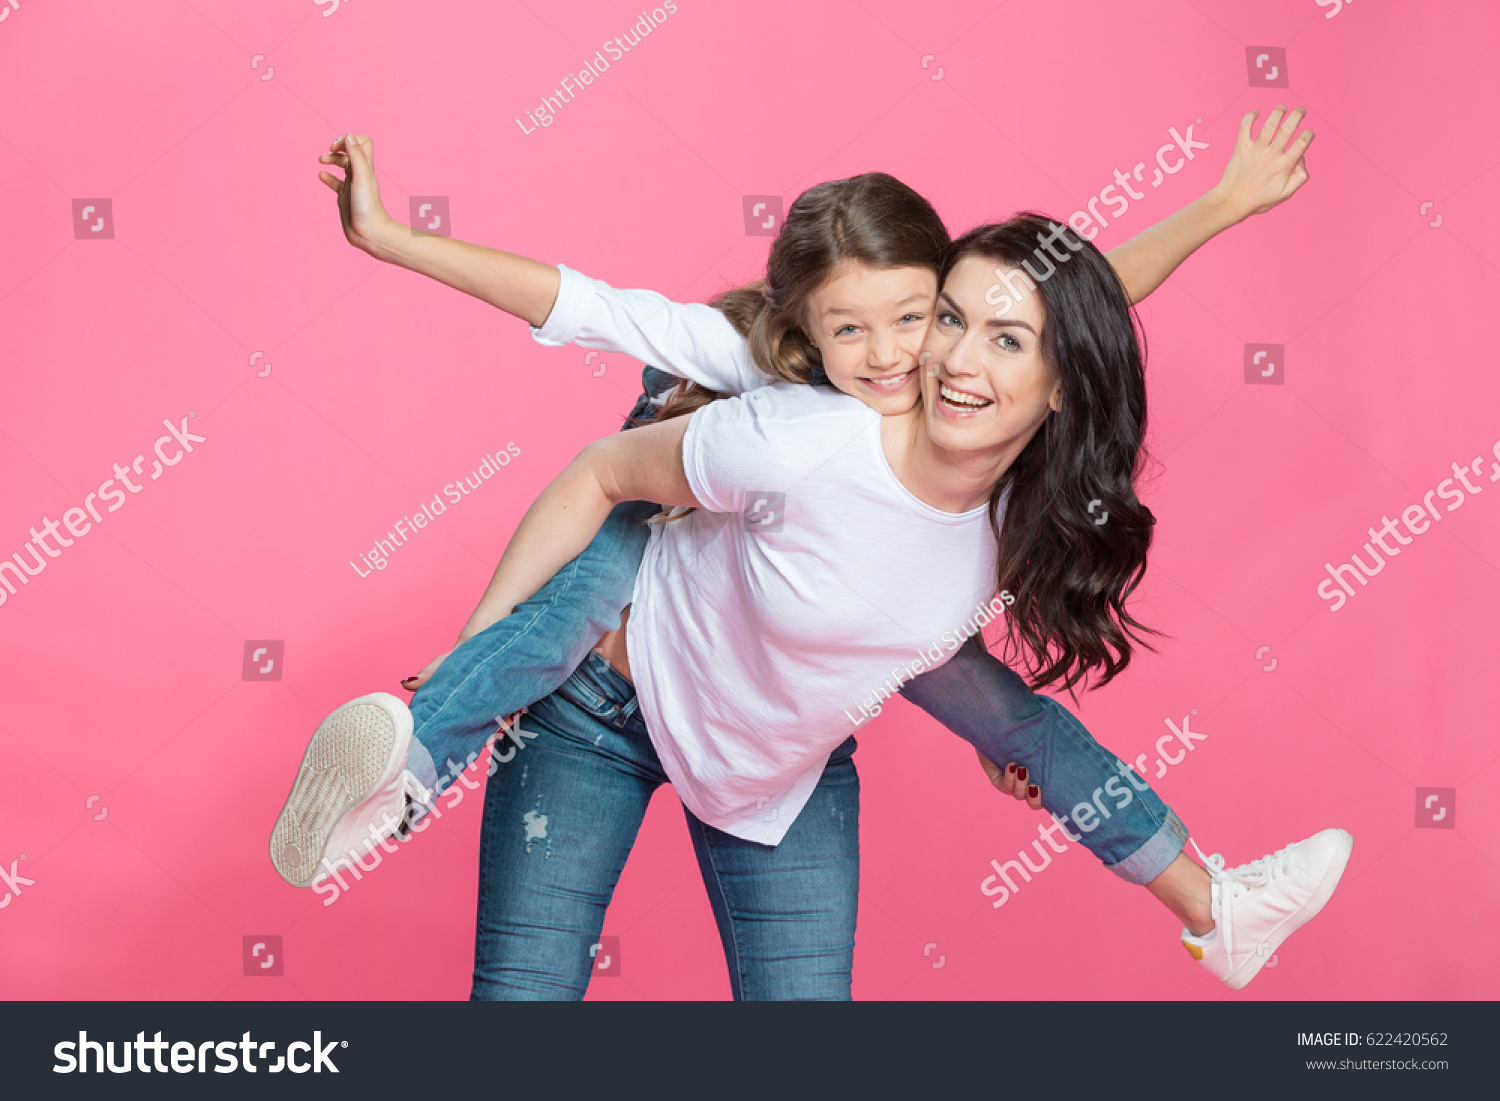 Happy mother piggybacking adorable little daughter smiling at camera #622420562